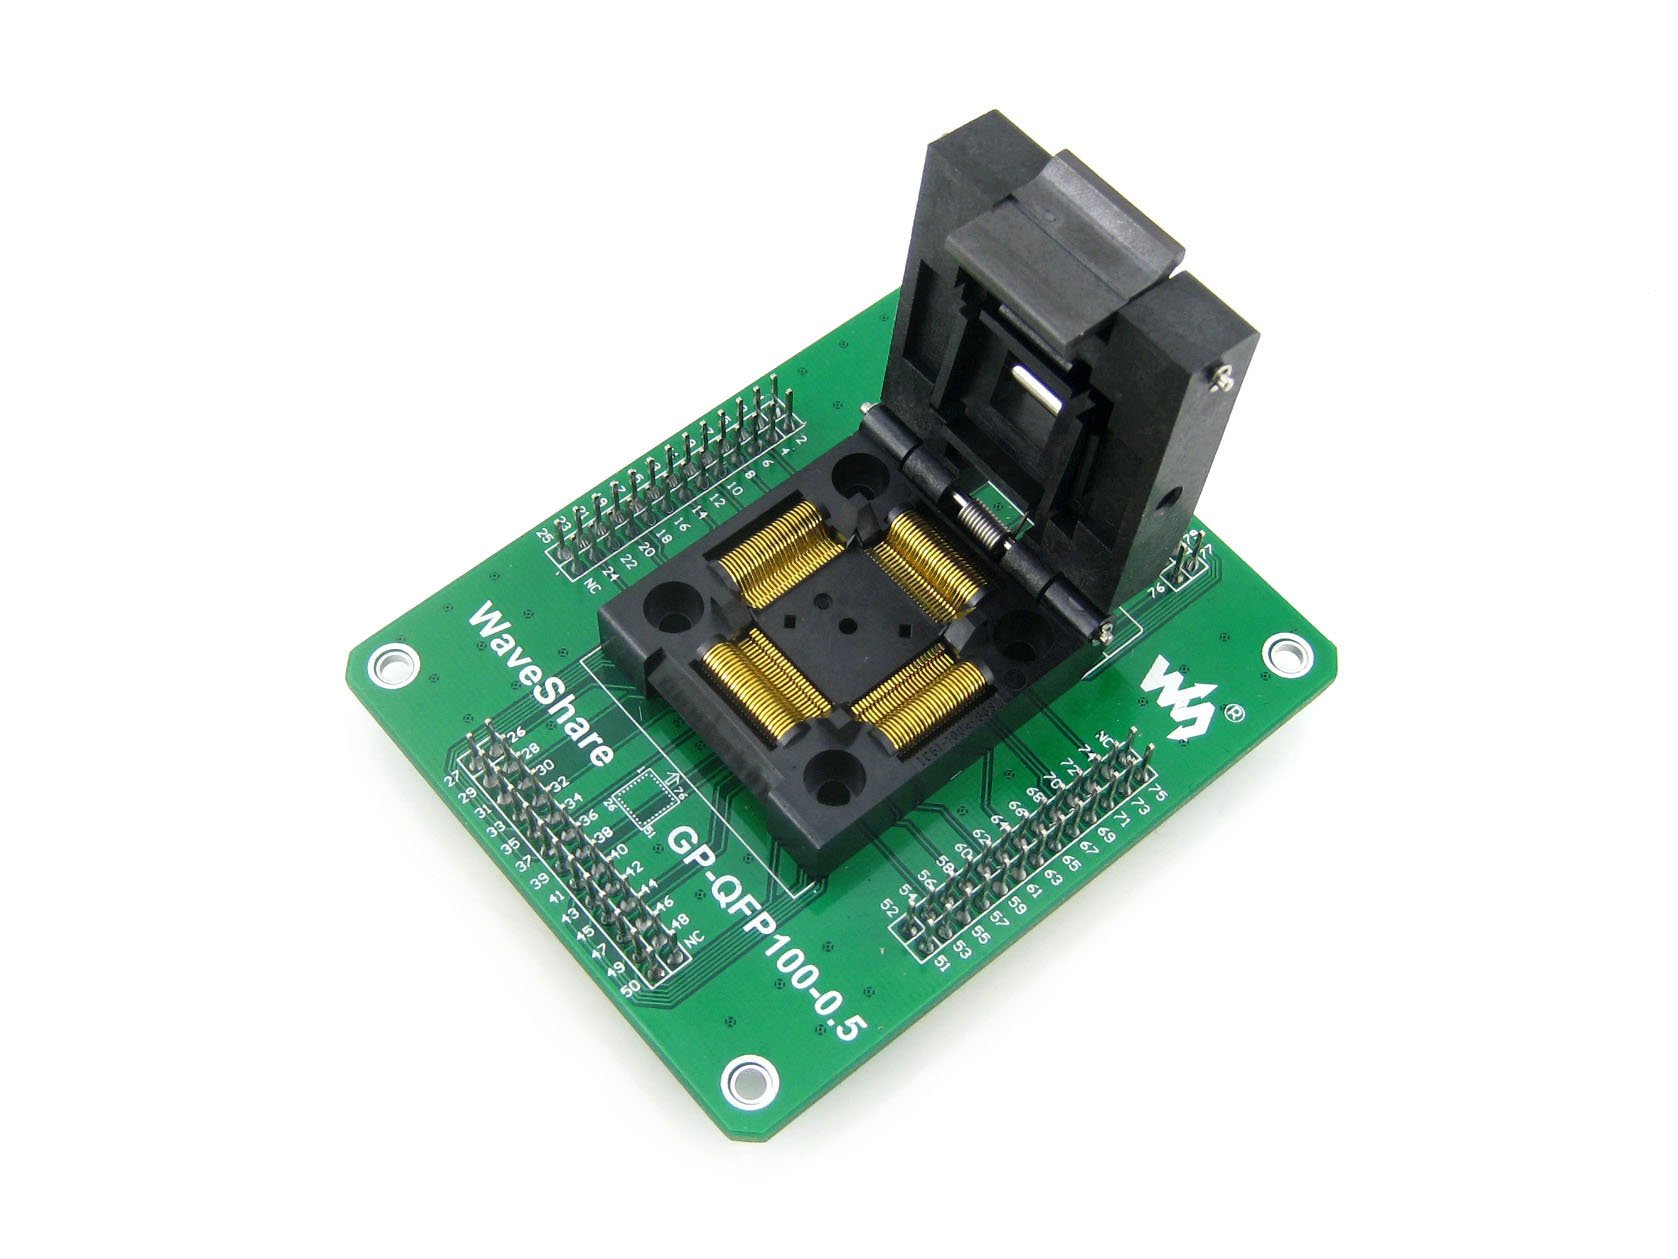 pzsmocn Clamshell Programming Connector/Converter/Adapter GP-QFP100-0.5 (with PCB), 100-Pin, 0.5mm Pitch, Yamaichi IC Test Burn-in Socket Adapter, Applied to QFP100, TQFP100, LQFP100 Packages.